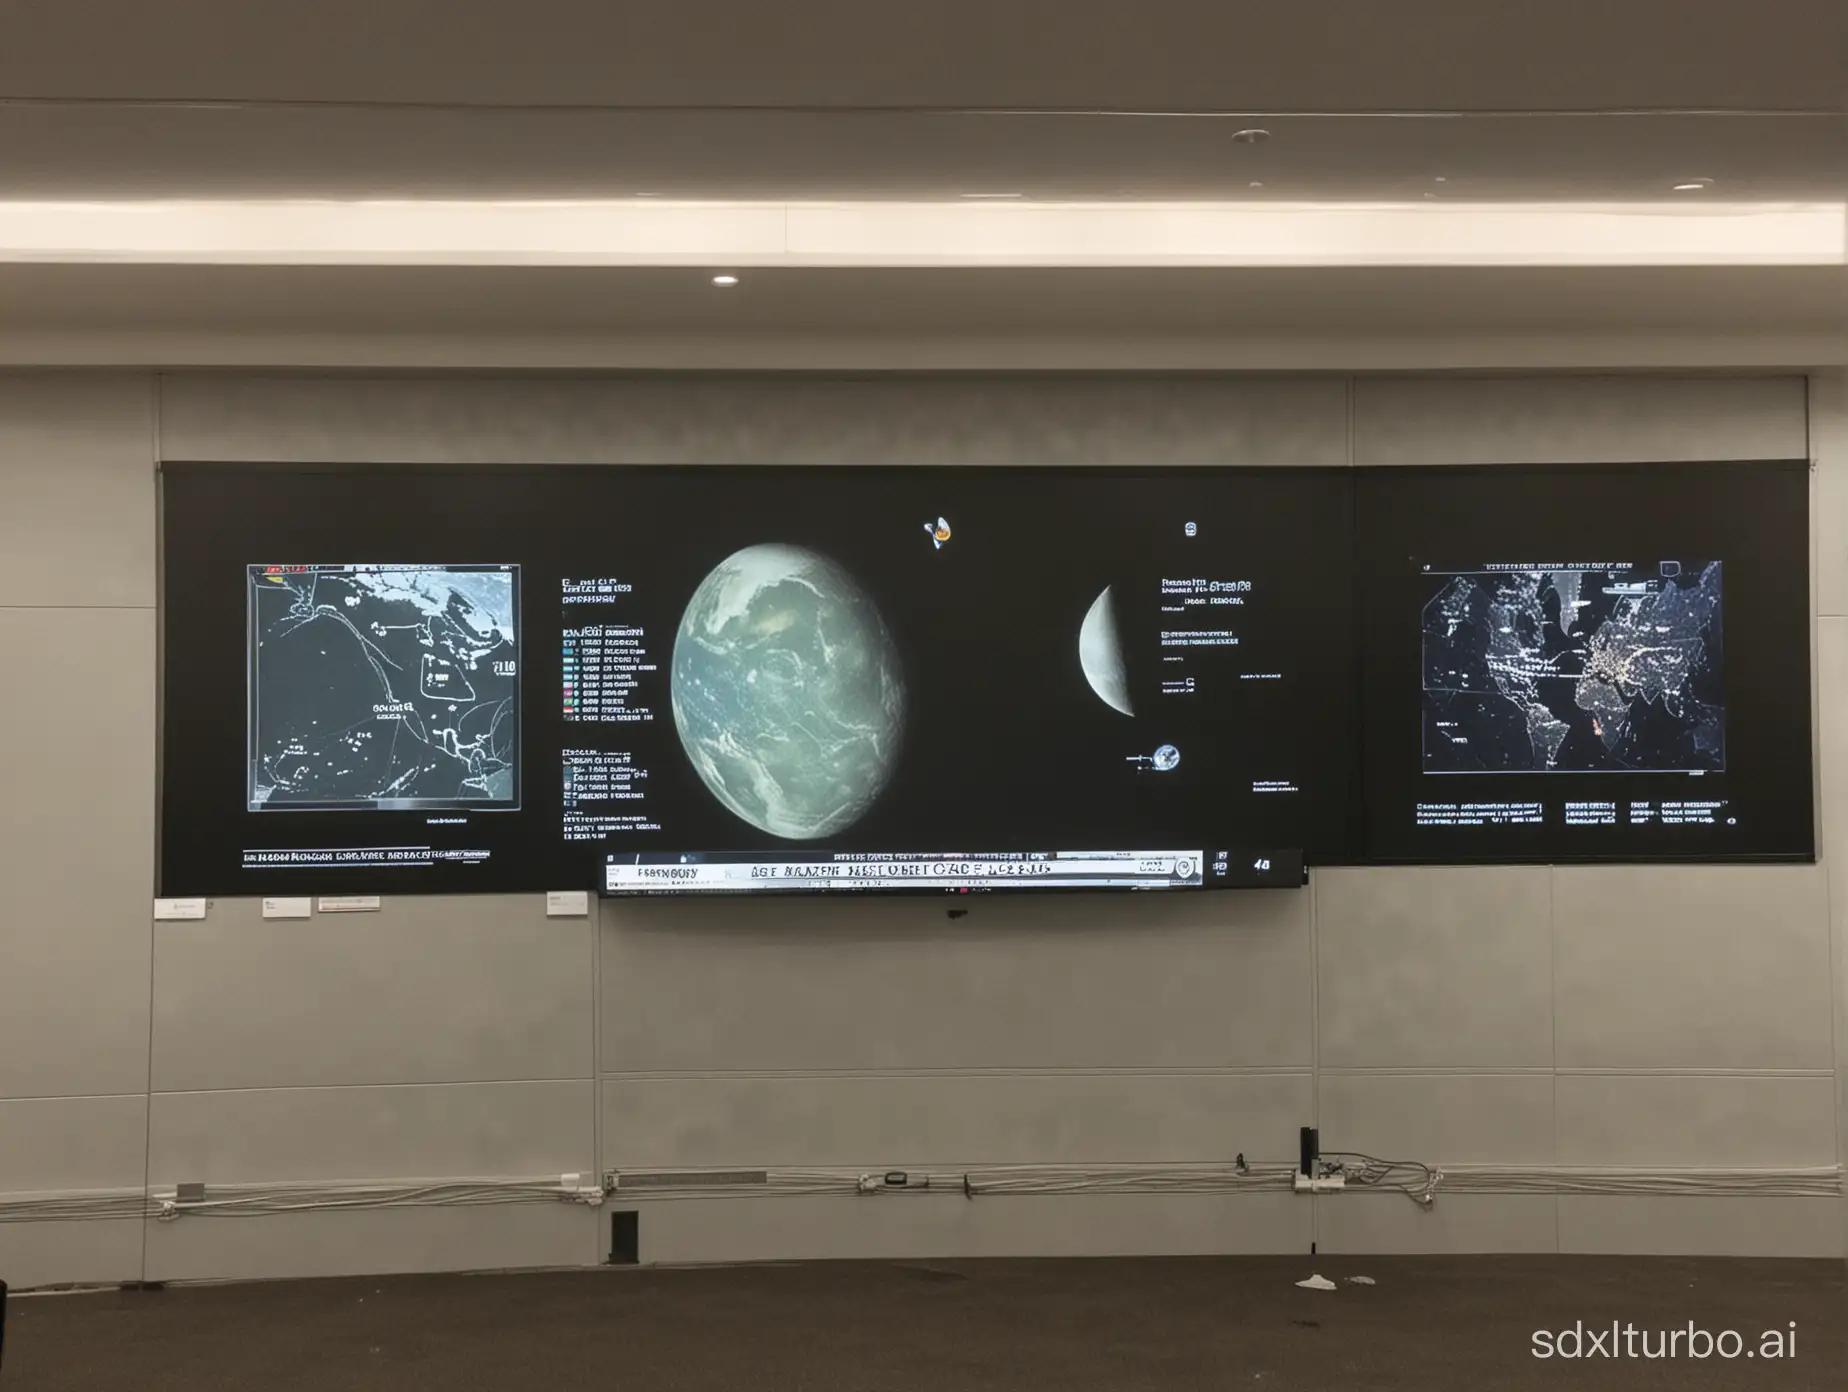 Empty-Space-Four-Giant-Screens-Displaying-EarthMoon-and-Rocket-Launch-Information